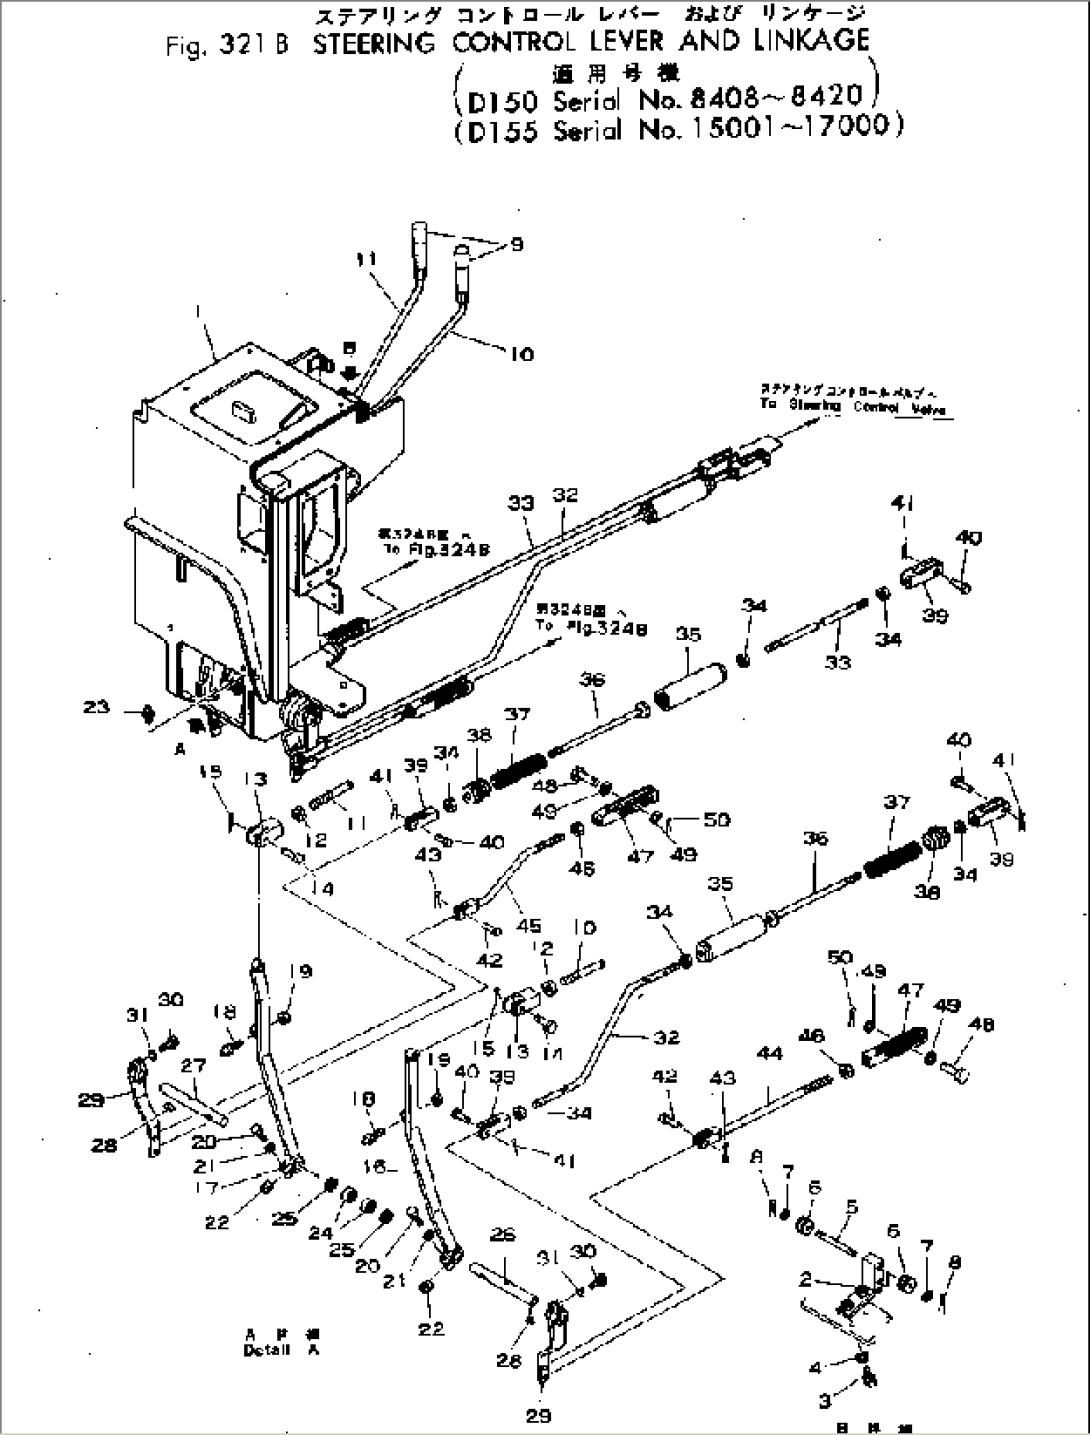 STEERING CONTROL LEVER AND LINKAGE(#8408-8420)